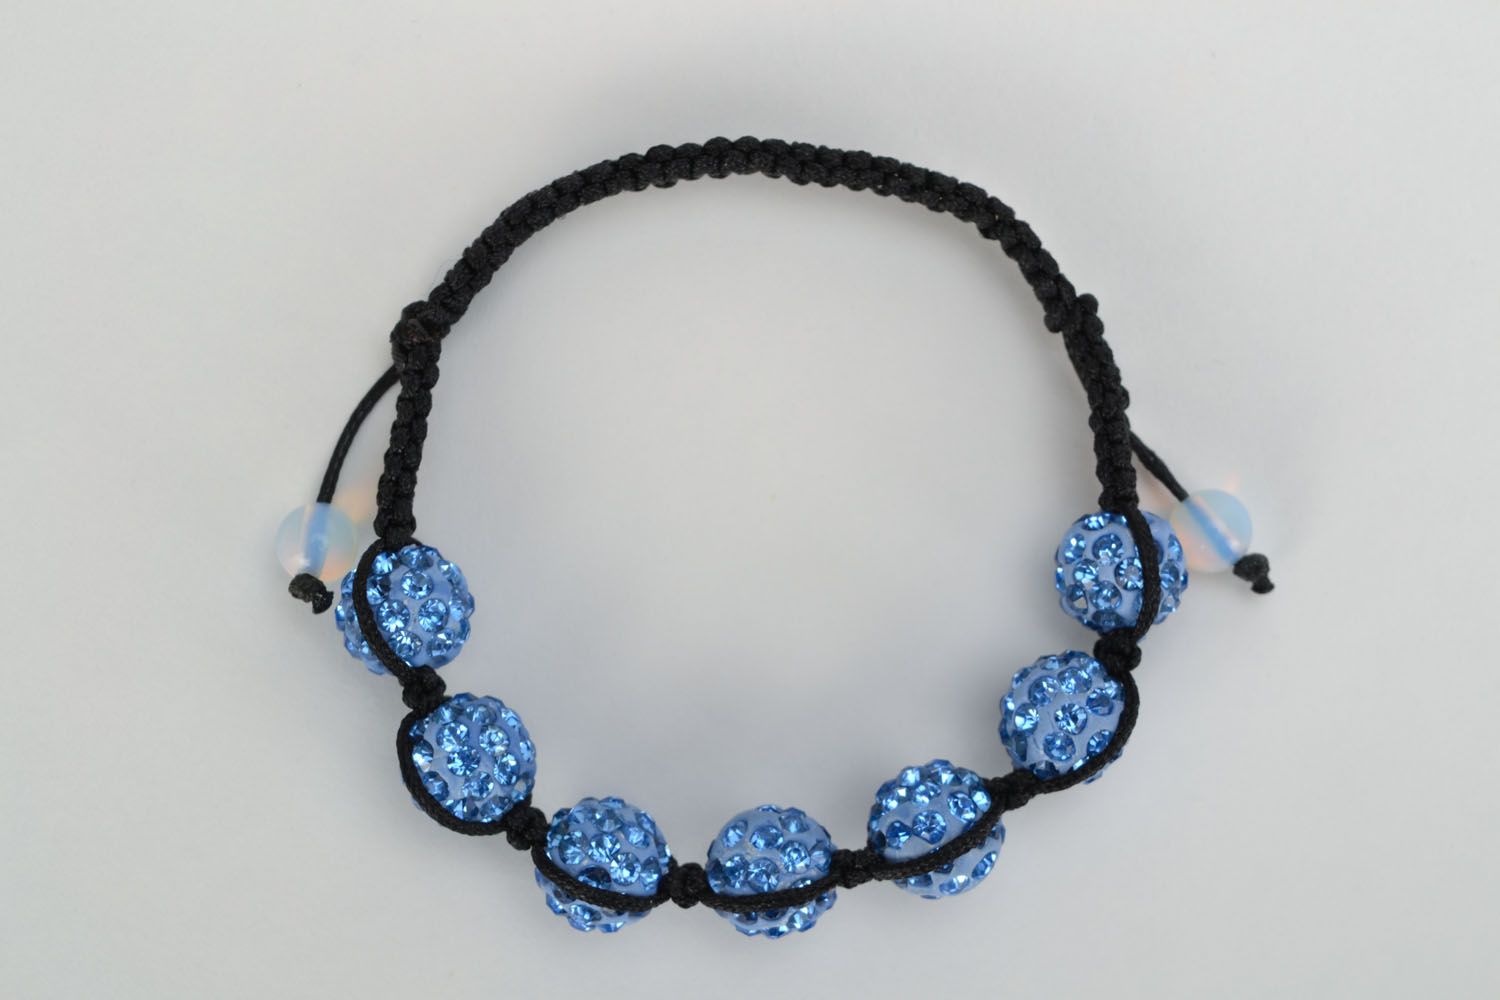 Bracelet made of blue beads and cord photo 3